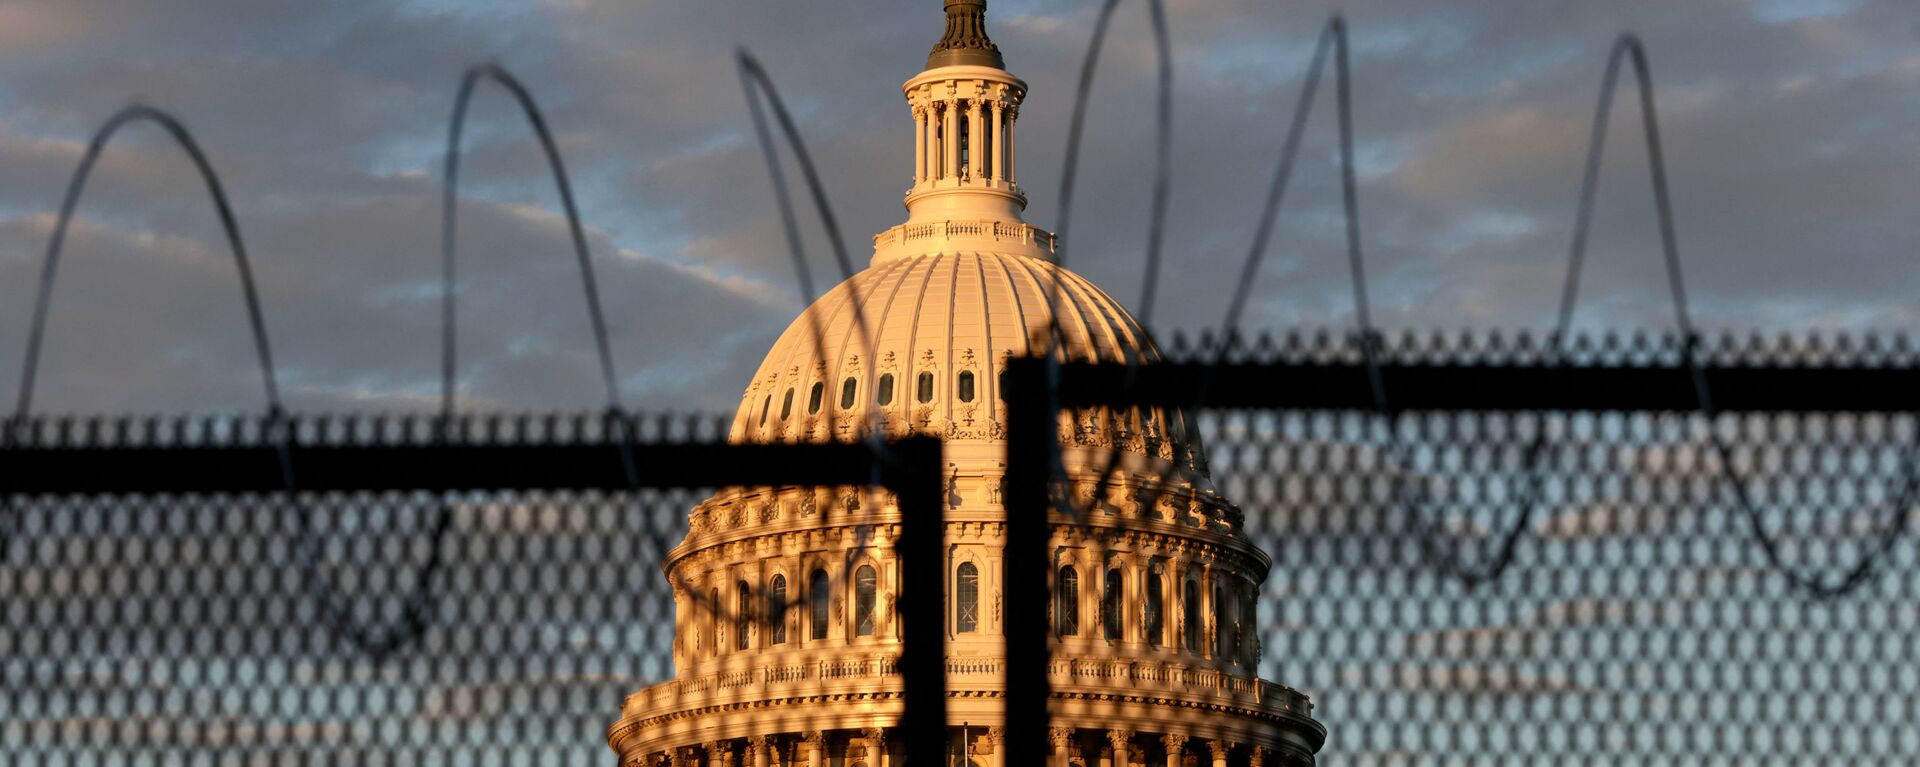  The U.S. Capitol is seen behind a fence with razor wire during sunrise on January 16, 2021 in Washington, DC. After last week's riots at the U.S. Capitol Building, the FBI has warned of additional threats in the nation's capital and in all 50 states. According to reports, as many as 25,000 National Guard soldiers will be guarding the city as preparations are made for the inauguration of Joe Biden as the 46th U.S. President. - Sputnik International, 1920, 29.10.2022